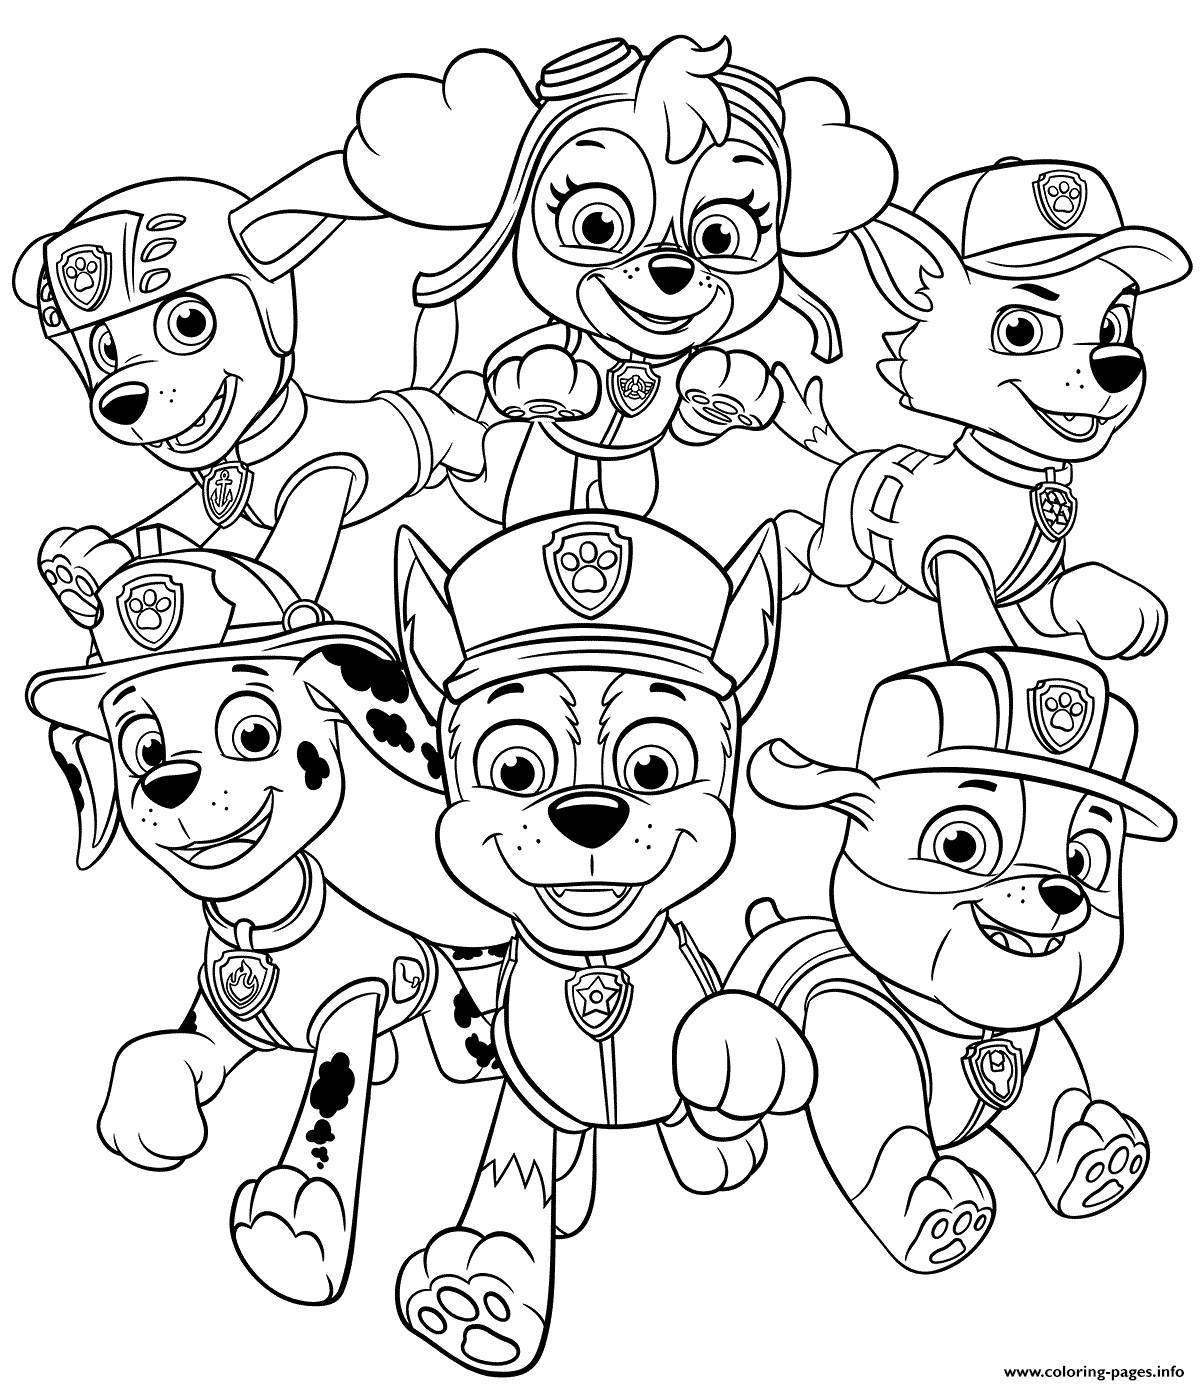 Paw patrol pictures #12